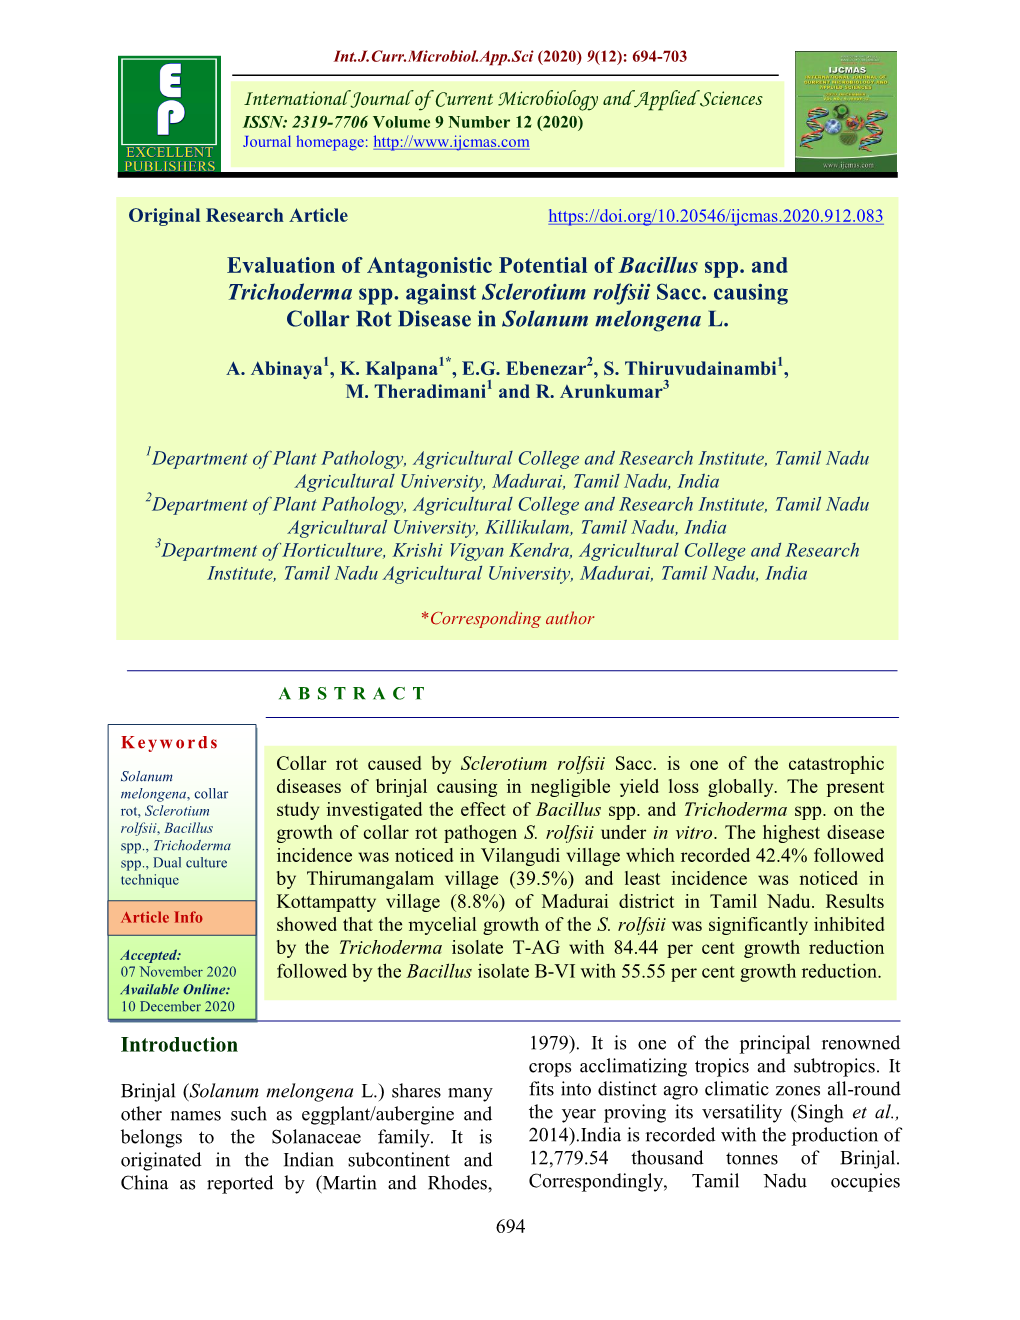 Evaluation of Antagonistic Potential of Bacillus Spp. and Trichoderma Spp